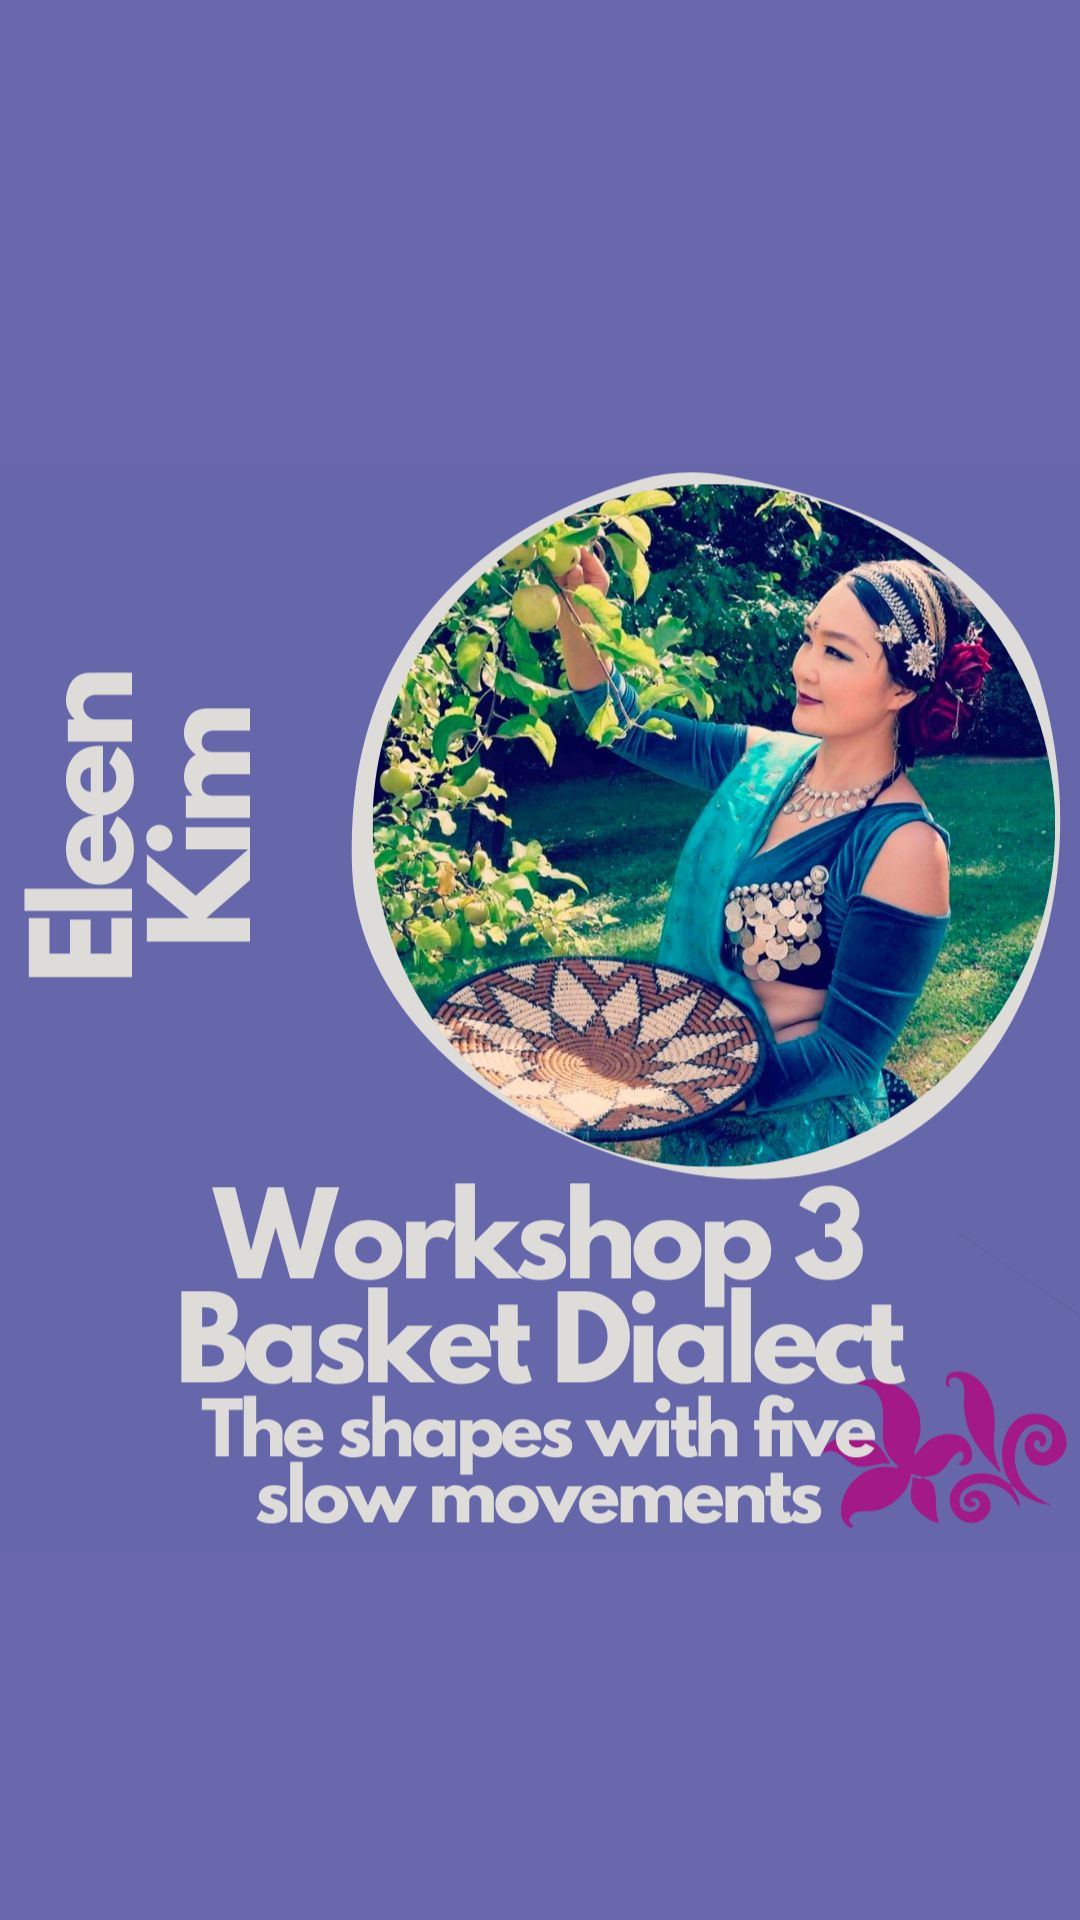 WS3 Basket Dialect: the shapes with five slow movements w/ Eleen Kim